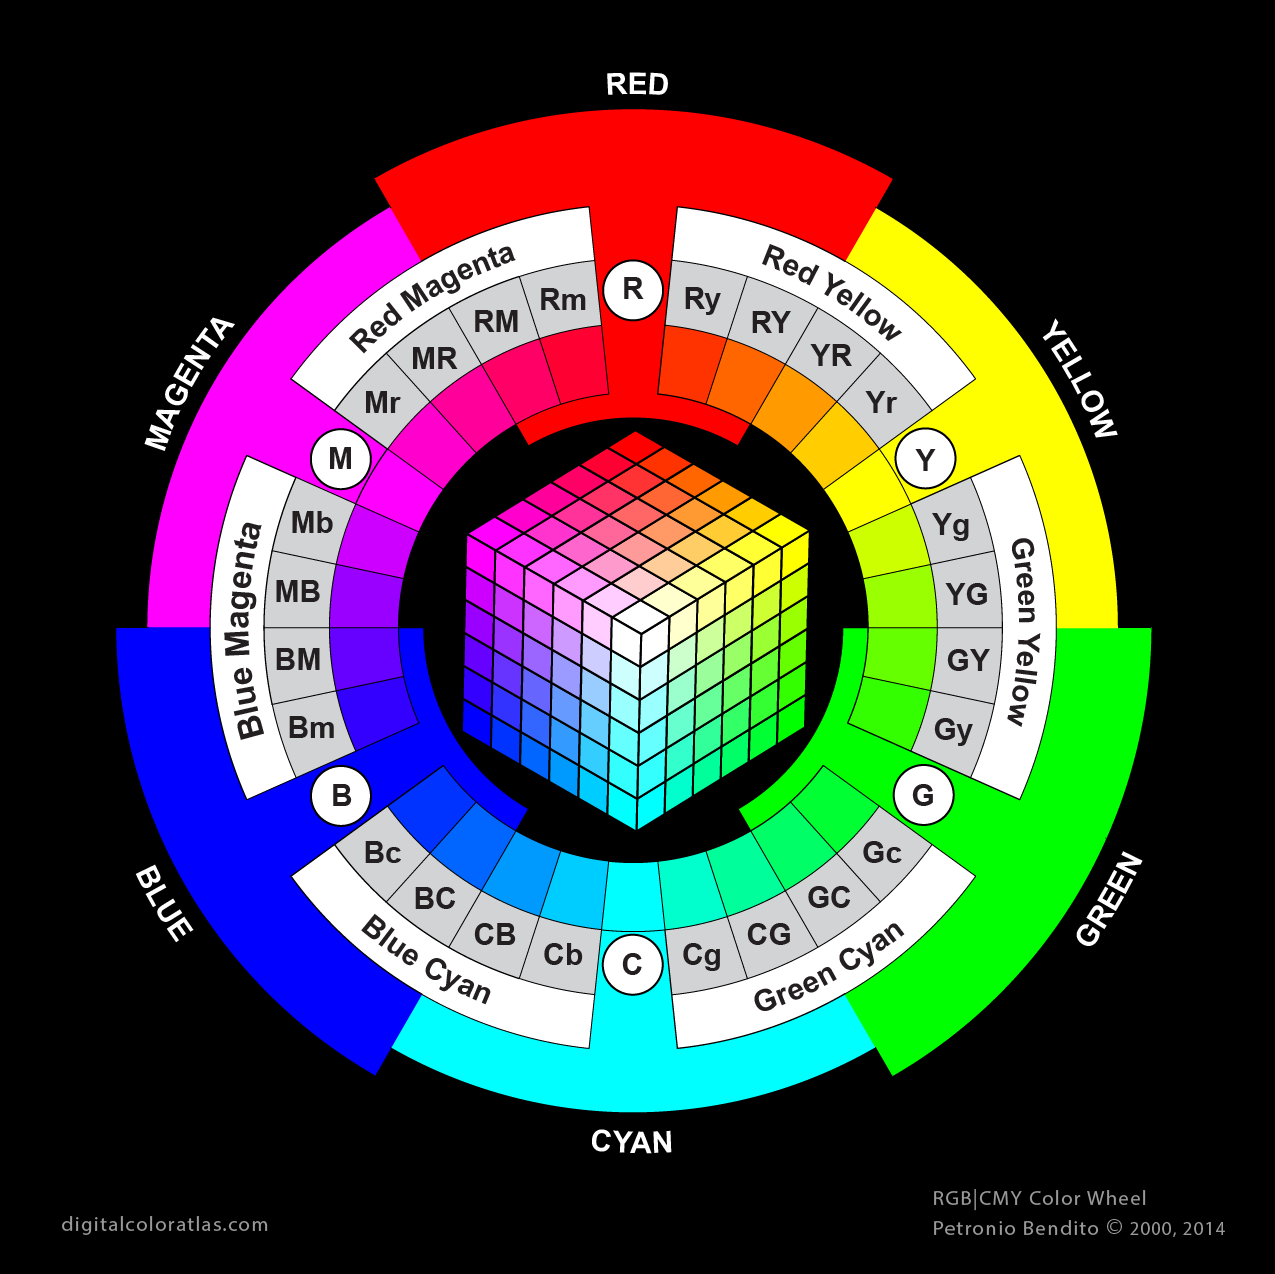 Updated RGB Color Wheel